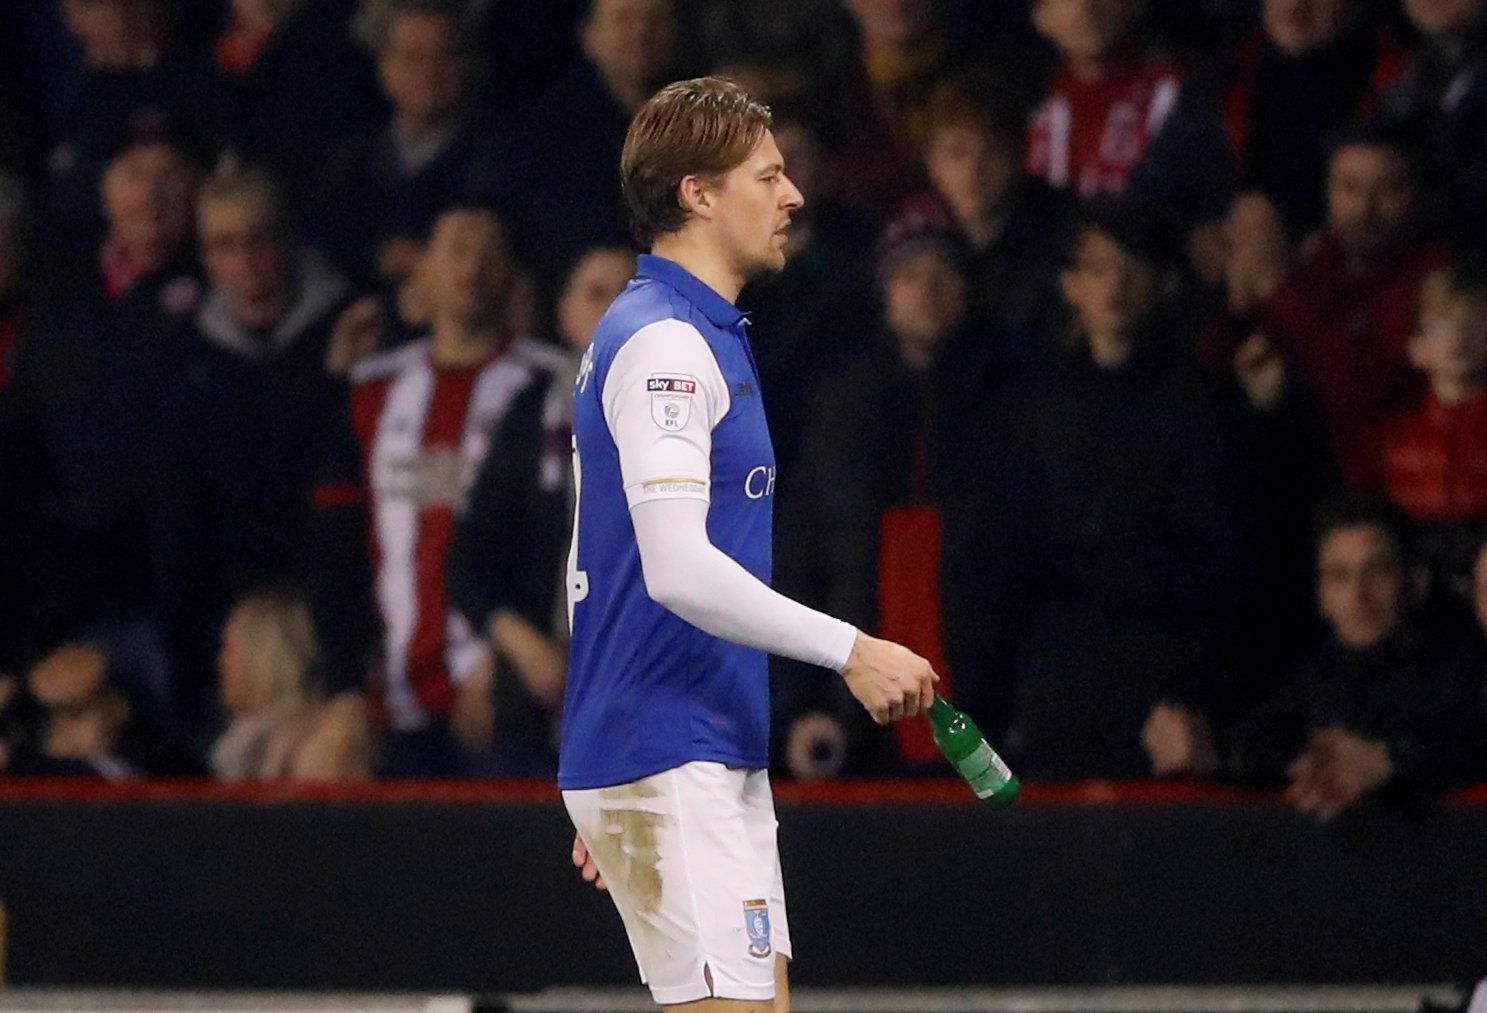 Soccer Football - Championship - Sheffield United vs Sheffield Wednesday - Bramall Lane, Sheffield, Britain - January 12, 2018   Sheffield Wednesday's Glenn Loovens holds a bottle that was thrown onto the pitch after being sent off         Action Images/Carl Recine    EDITORIAL USE ONLY. No use with unauthorized audio, video, data, fixture lists, club/league logos or "live" services. Online in-match use limited to 75 images, no video emulation. No use in betting, games or single club/league/play